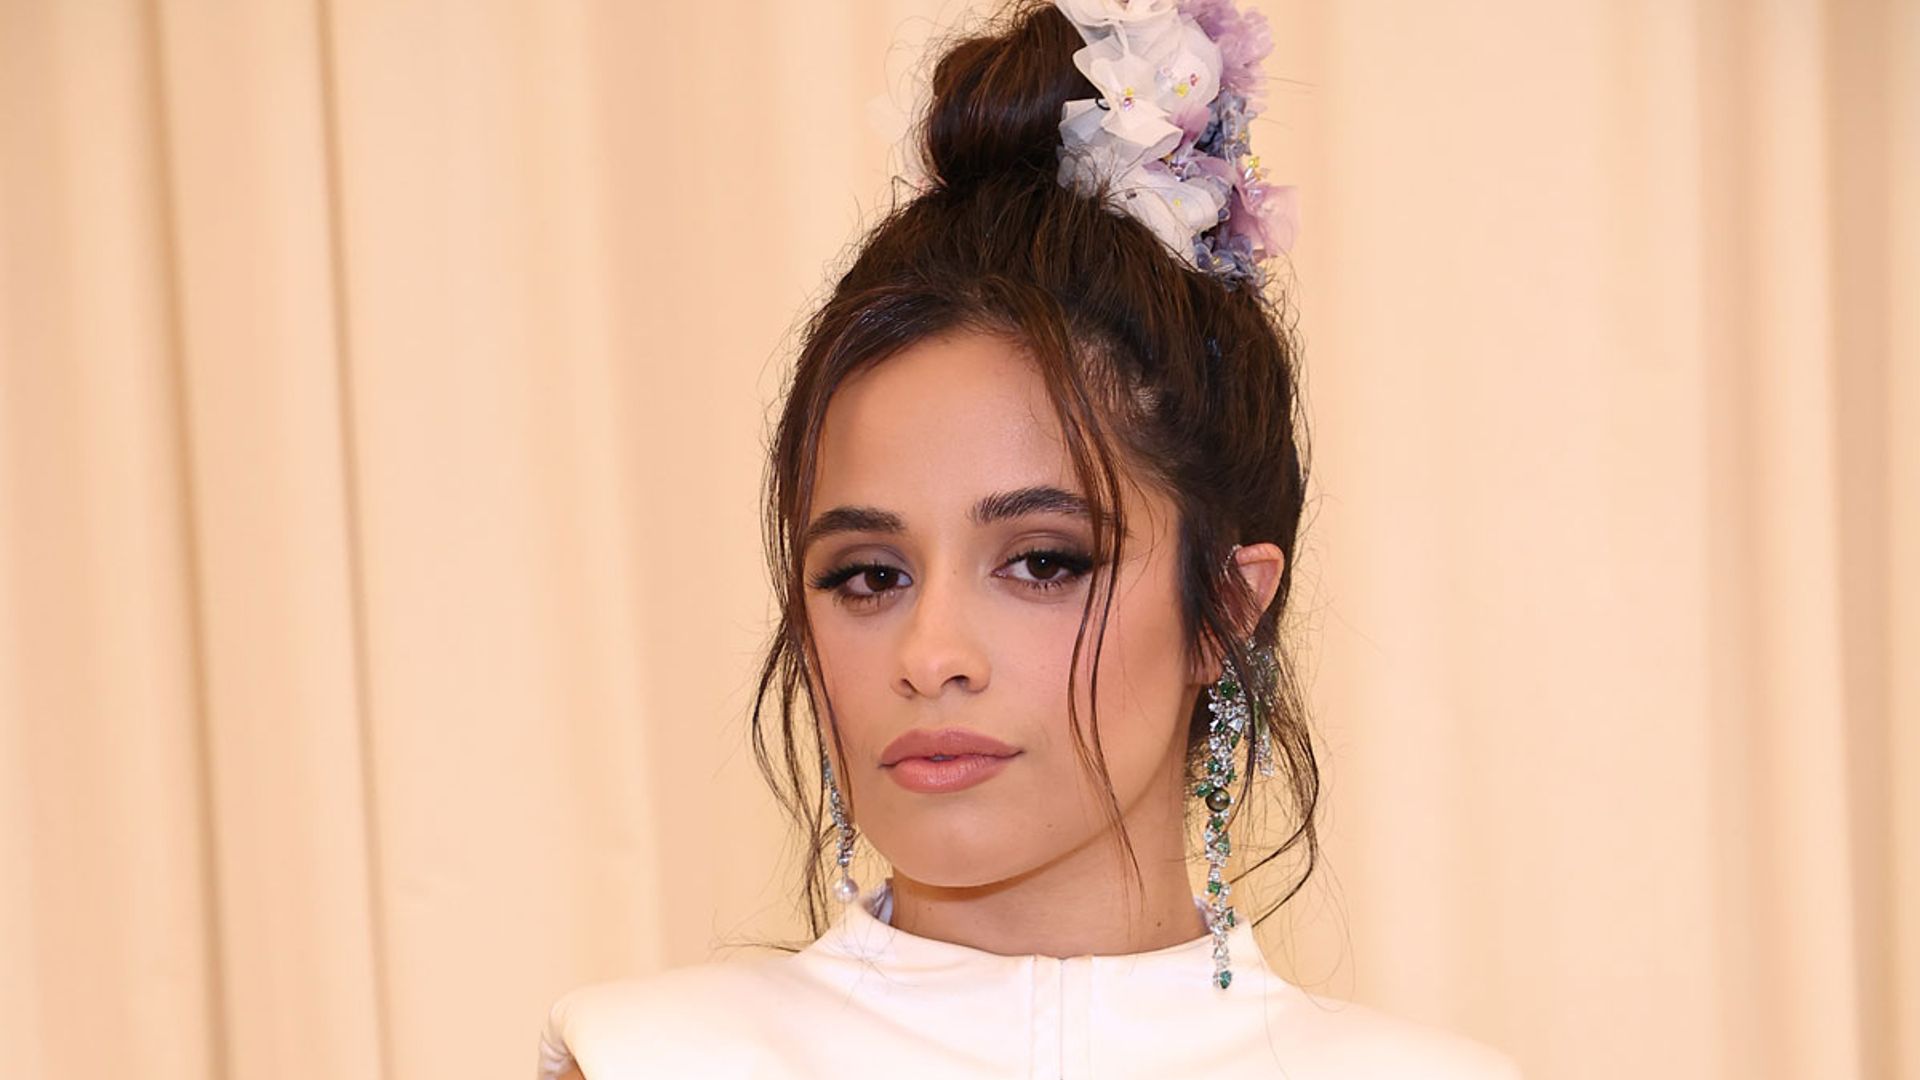 Camila Cabello shares health worries ahead of Met Gala – fans send their support